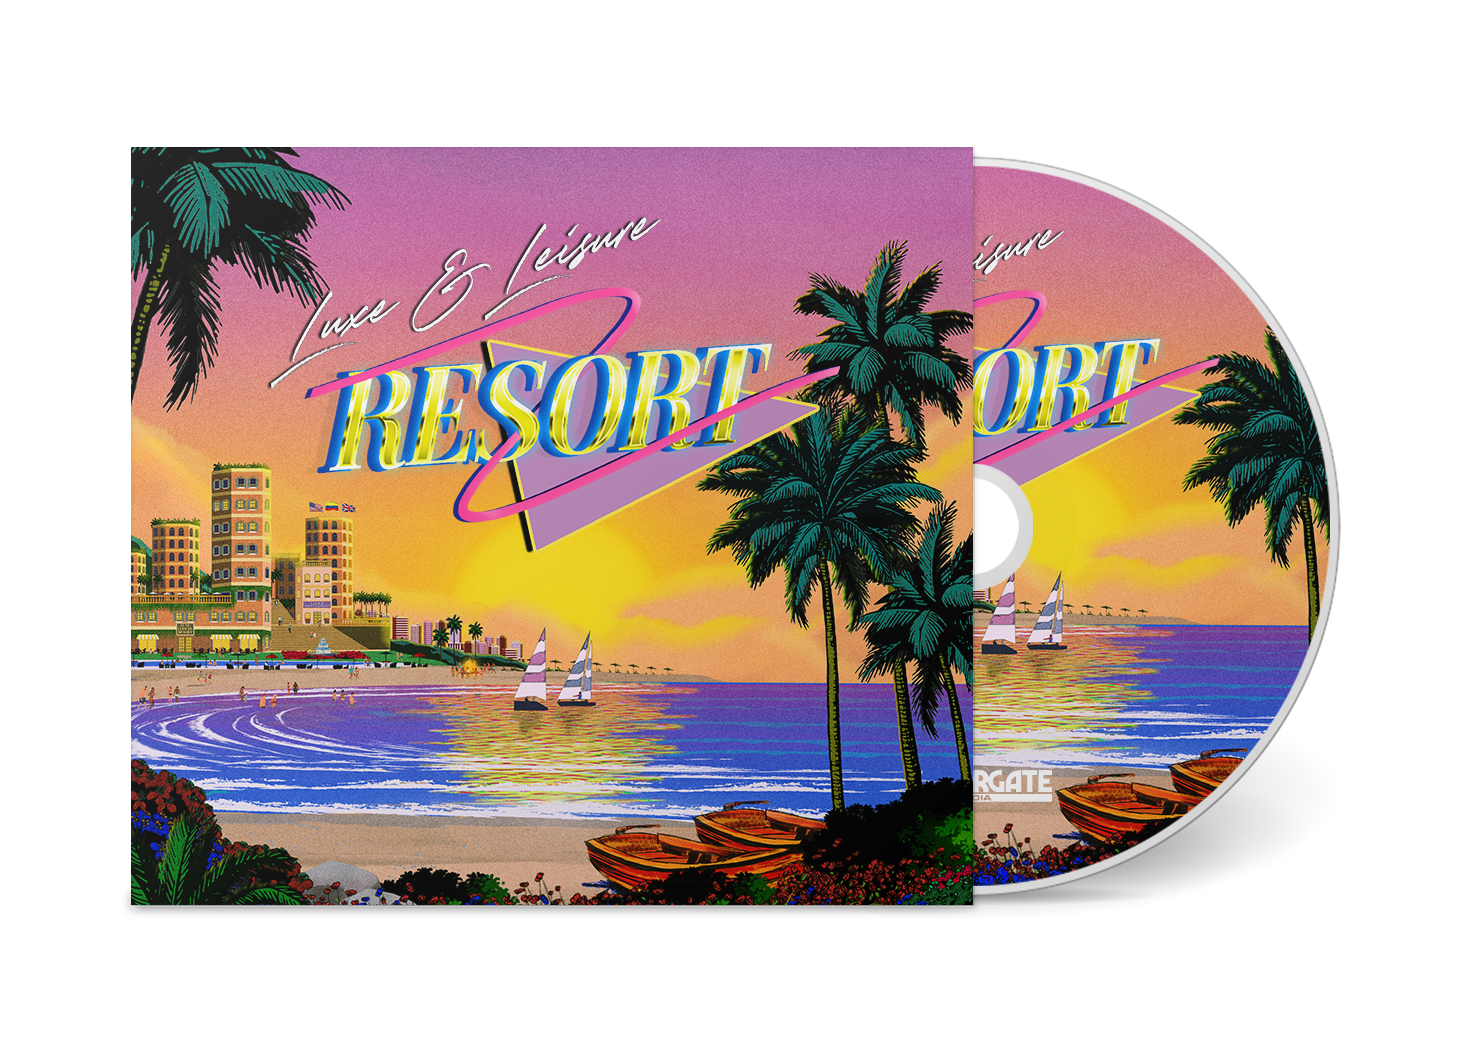 Luxe & Leisure - Resort [Compact Disc]